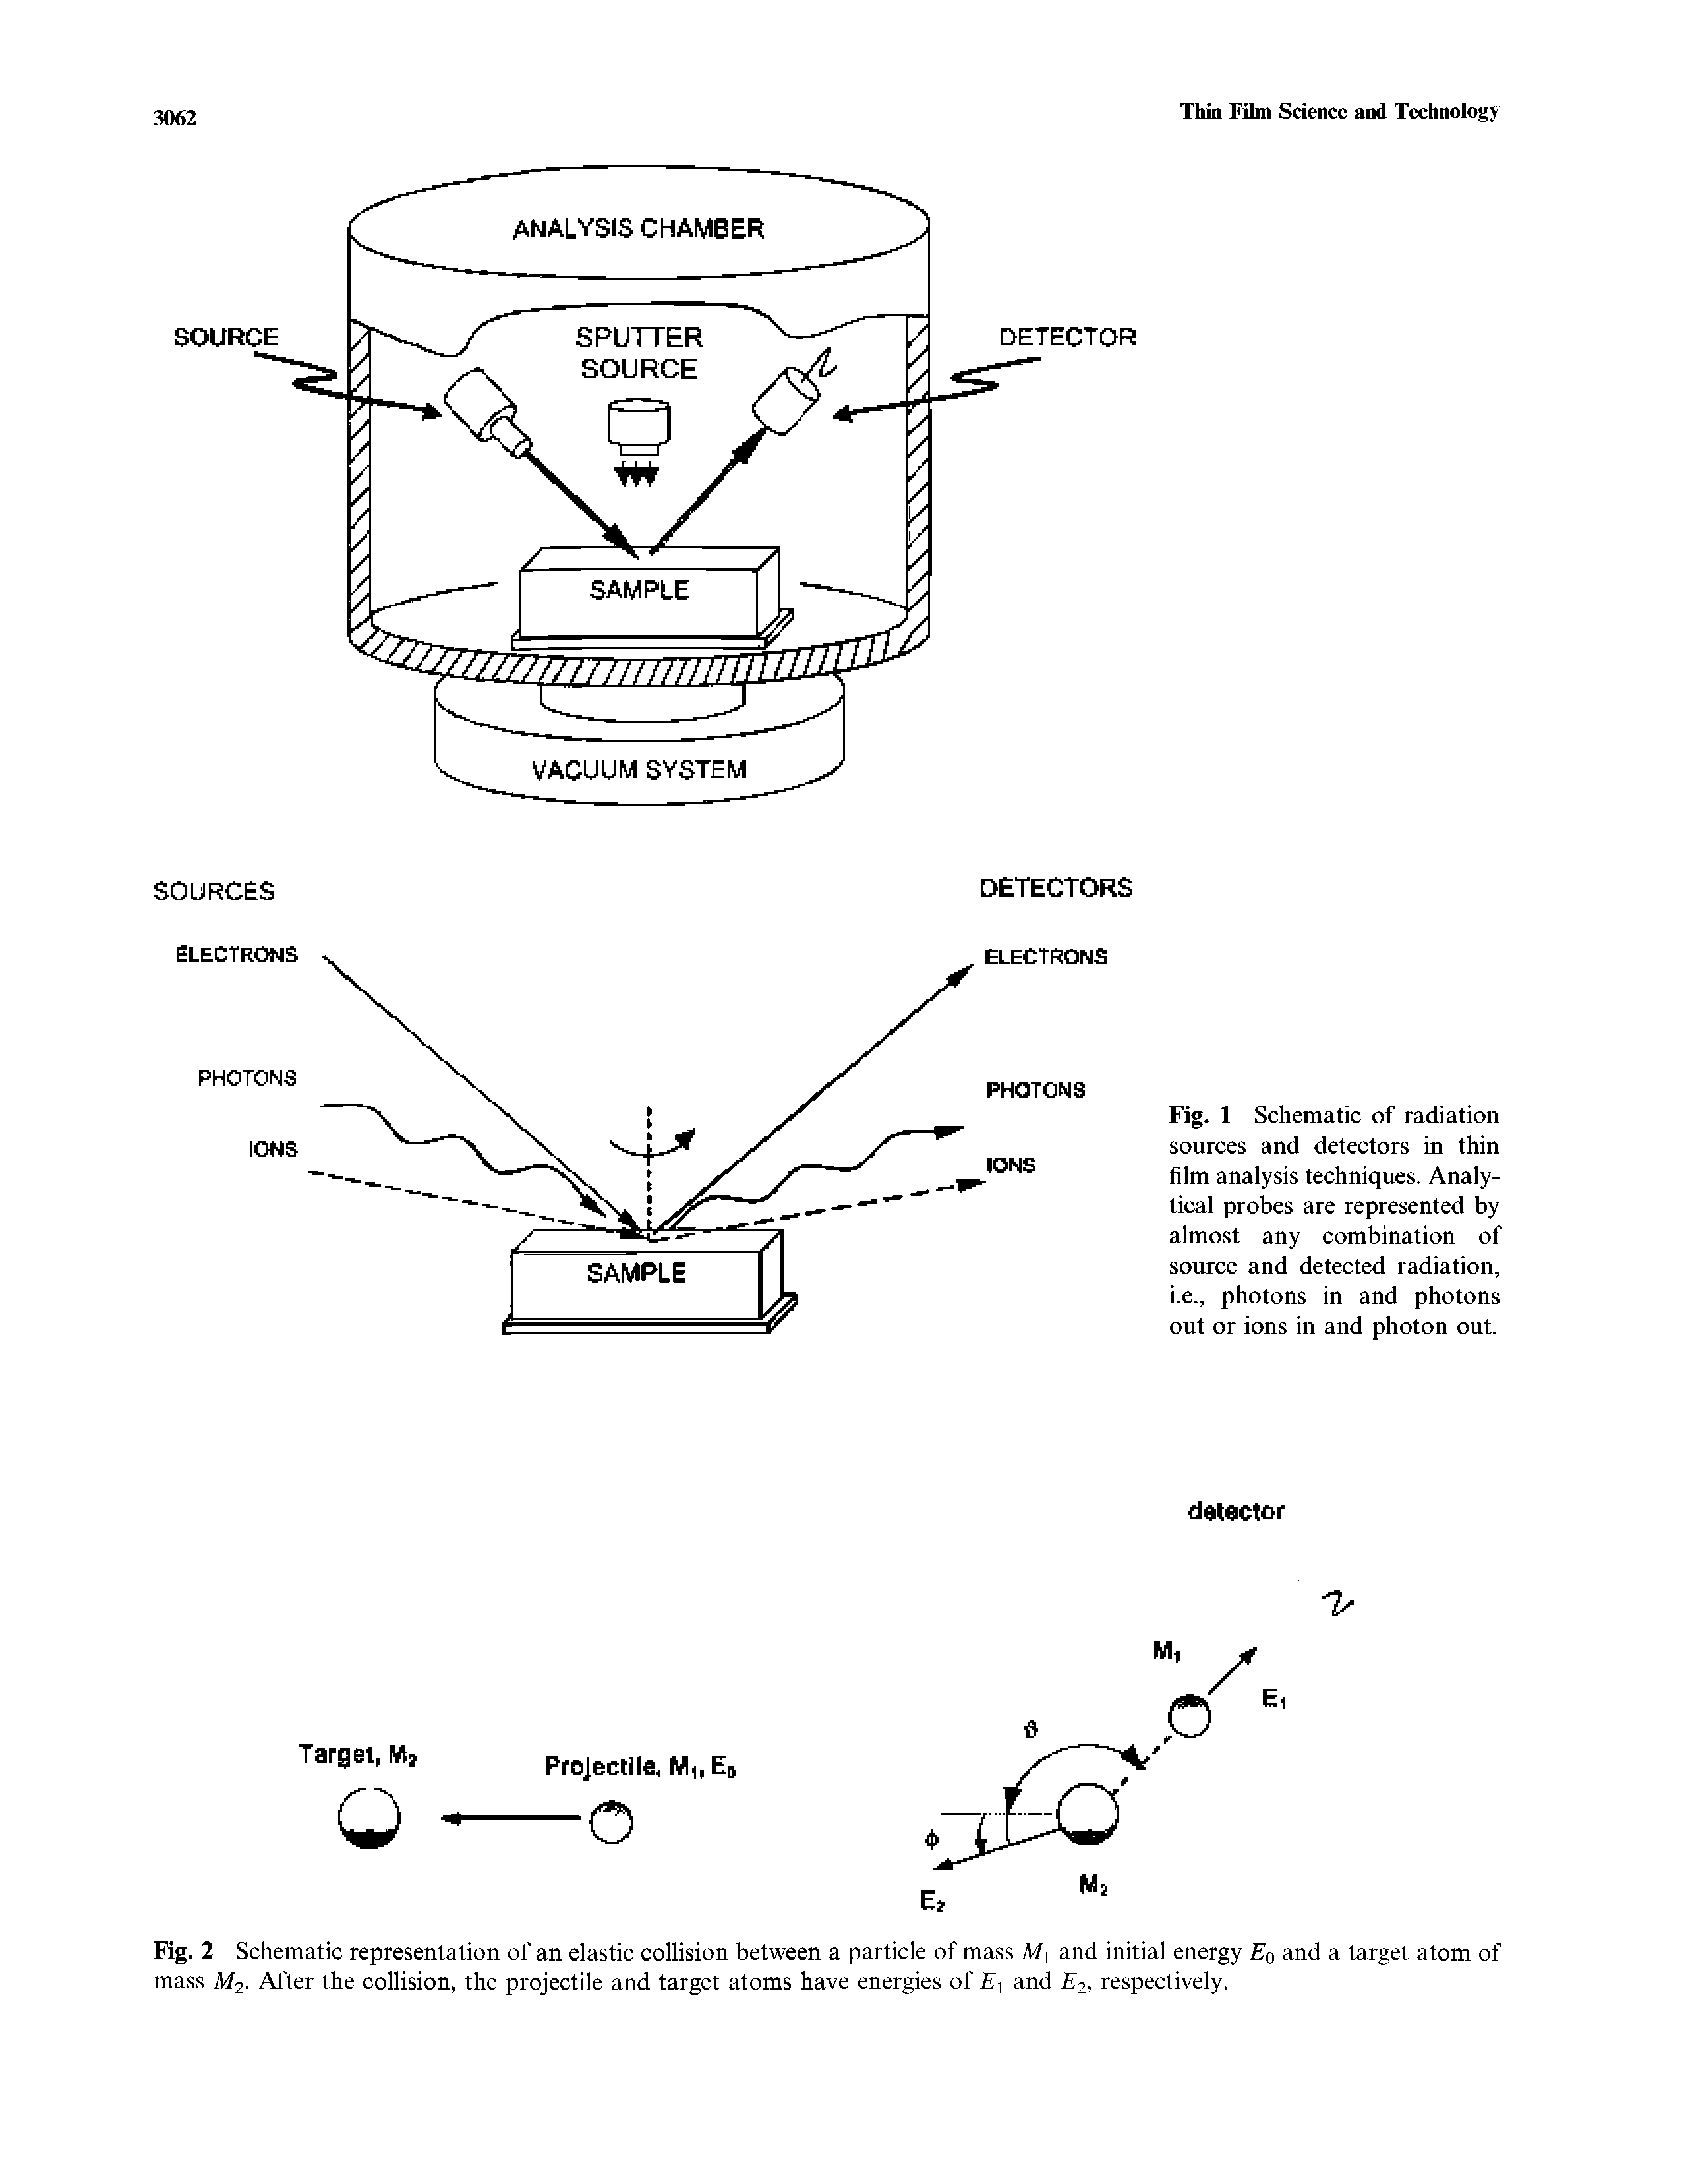 Fig. 1 Schematic of radiation sources and detectors in thin film analysis techniques. Analytical probes are represented by almost any combination of source and detected radiation, i.e., photons in and photons out or ions in and photon out.